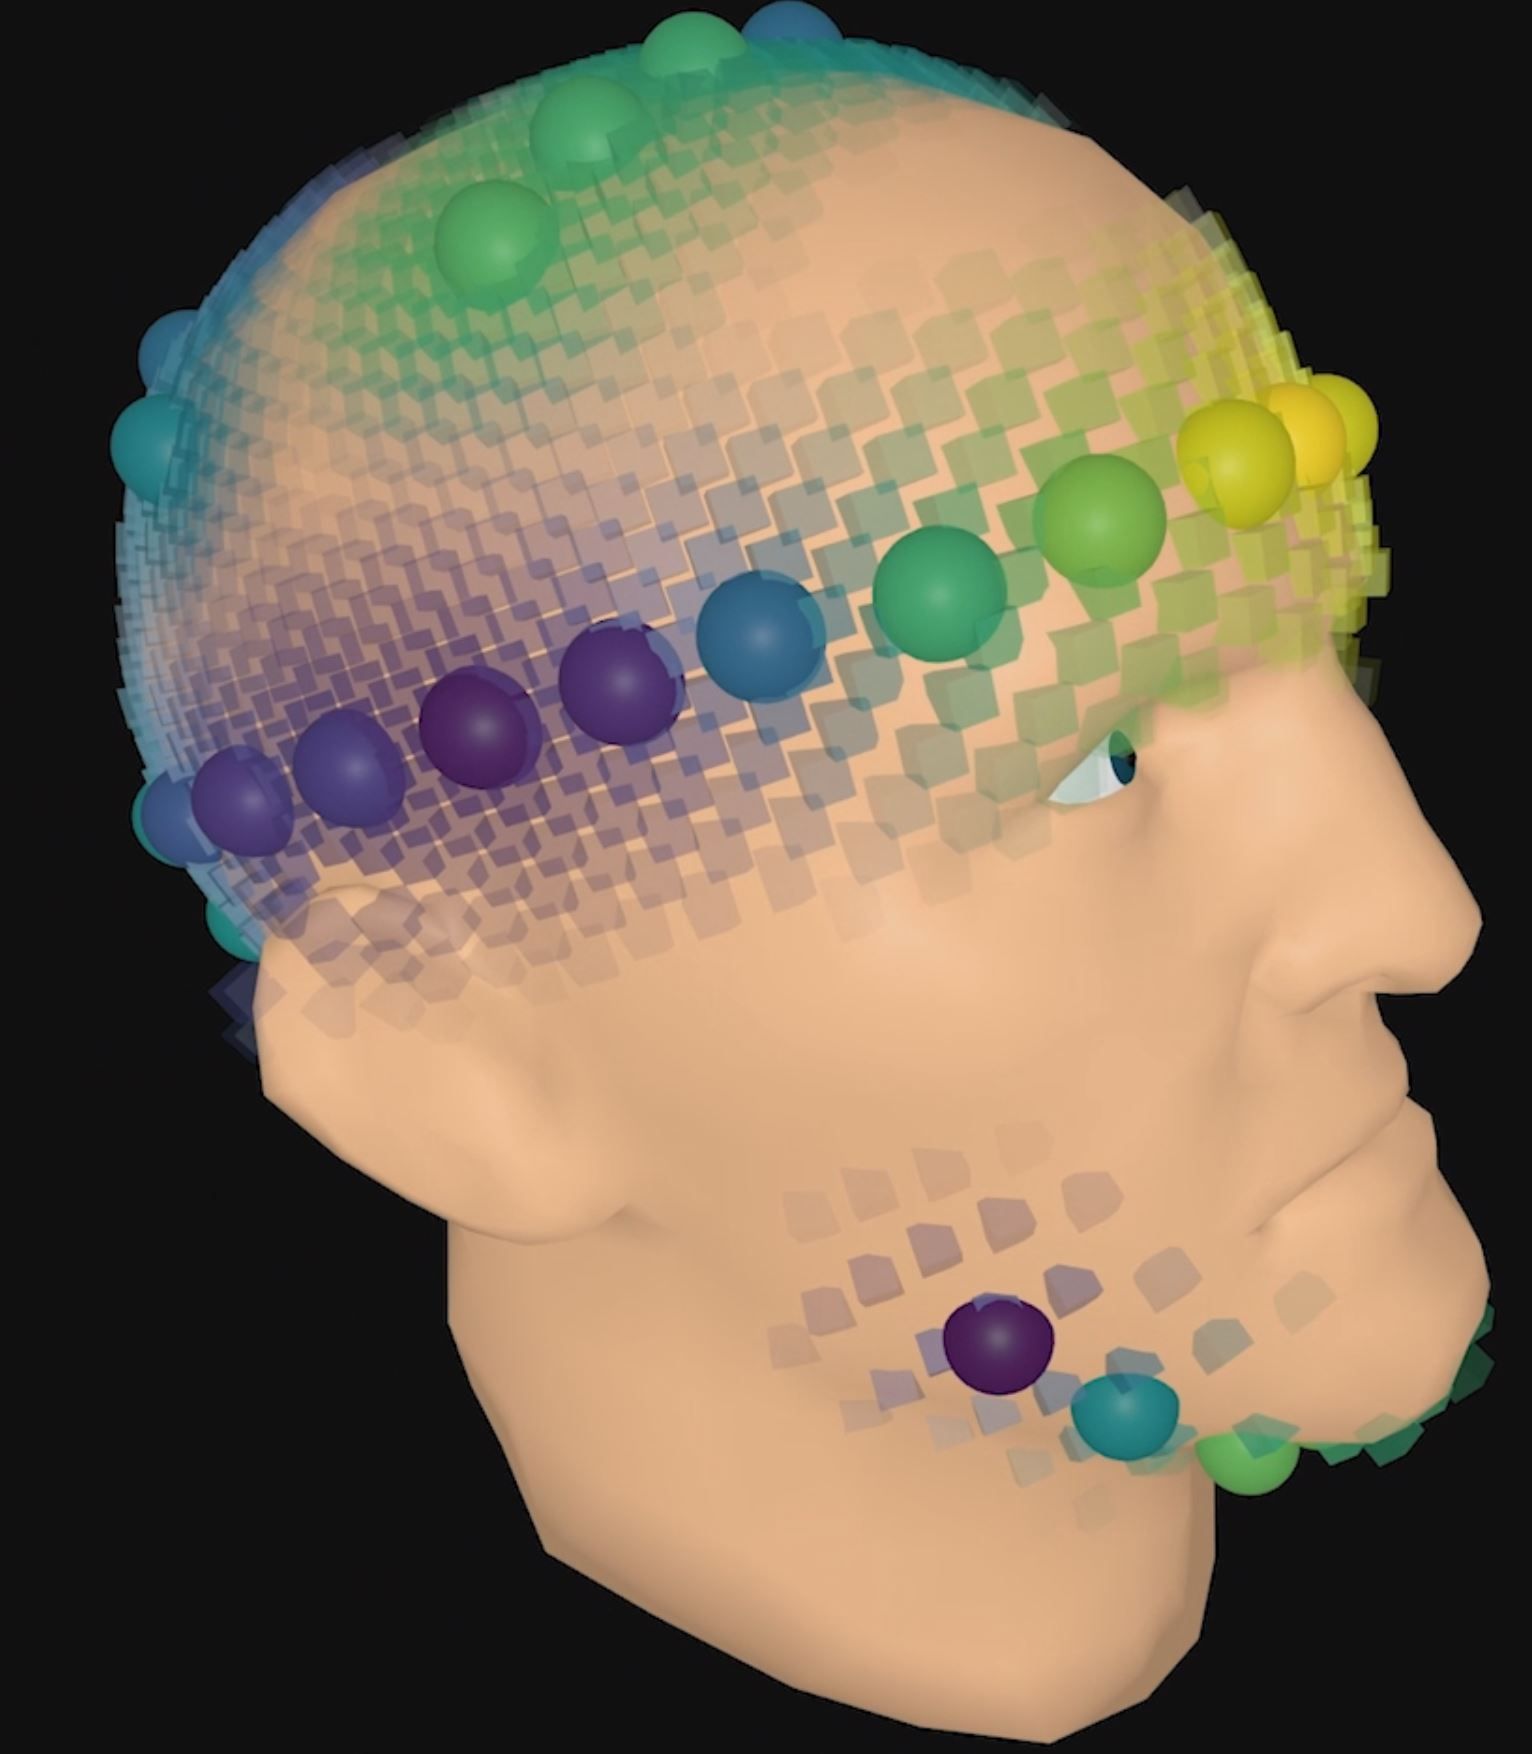 Vibrotactile Funneling Illusion and Localization Performance on the Head